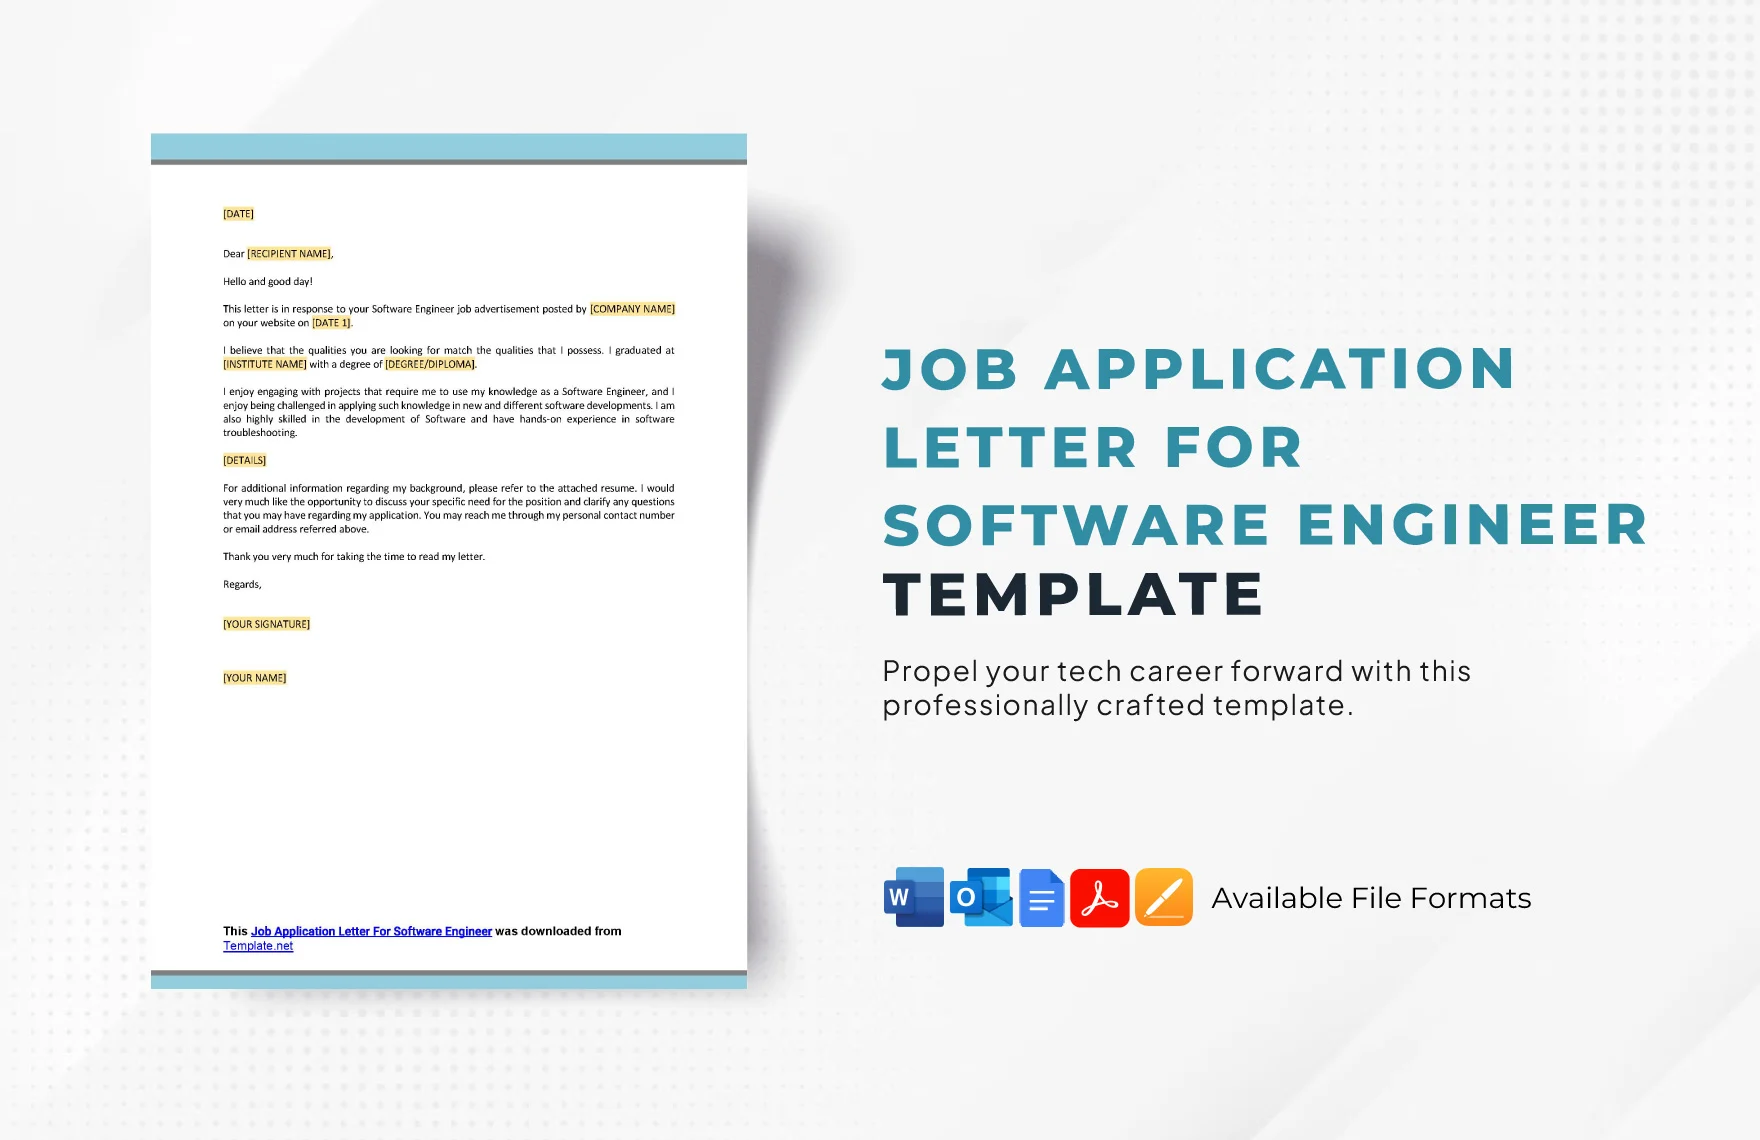 Free Job Application Letter For Software Engineer